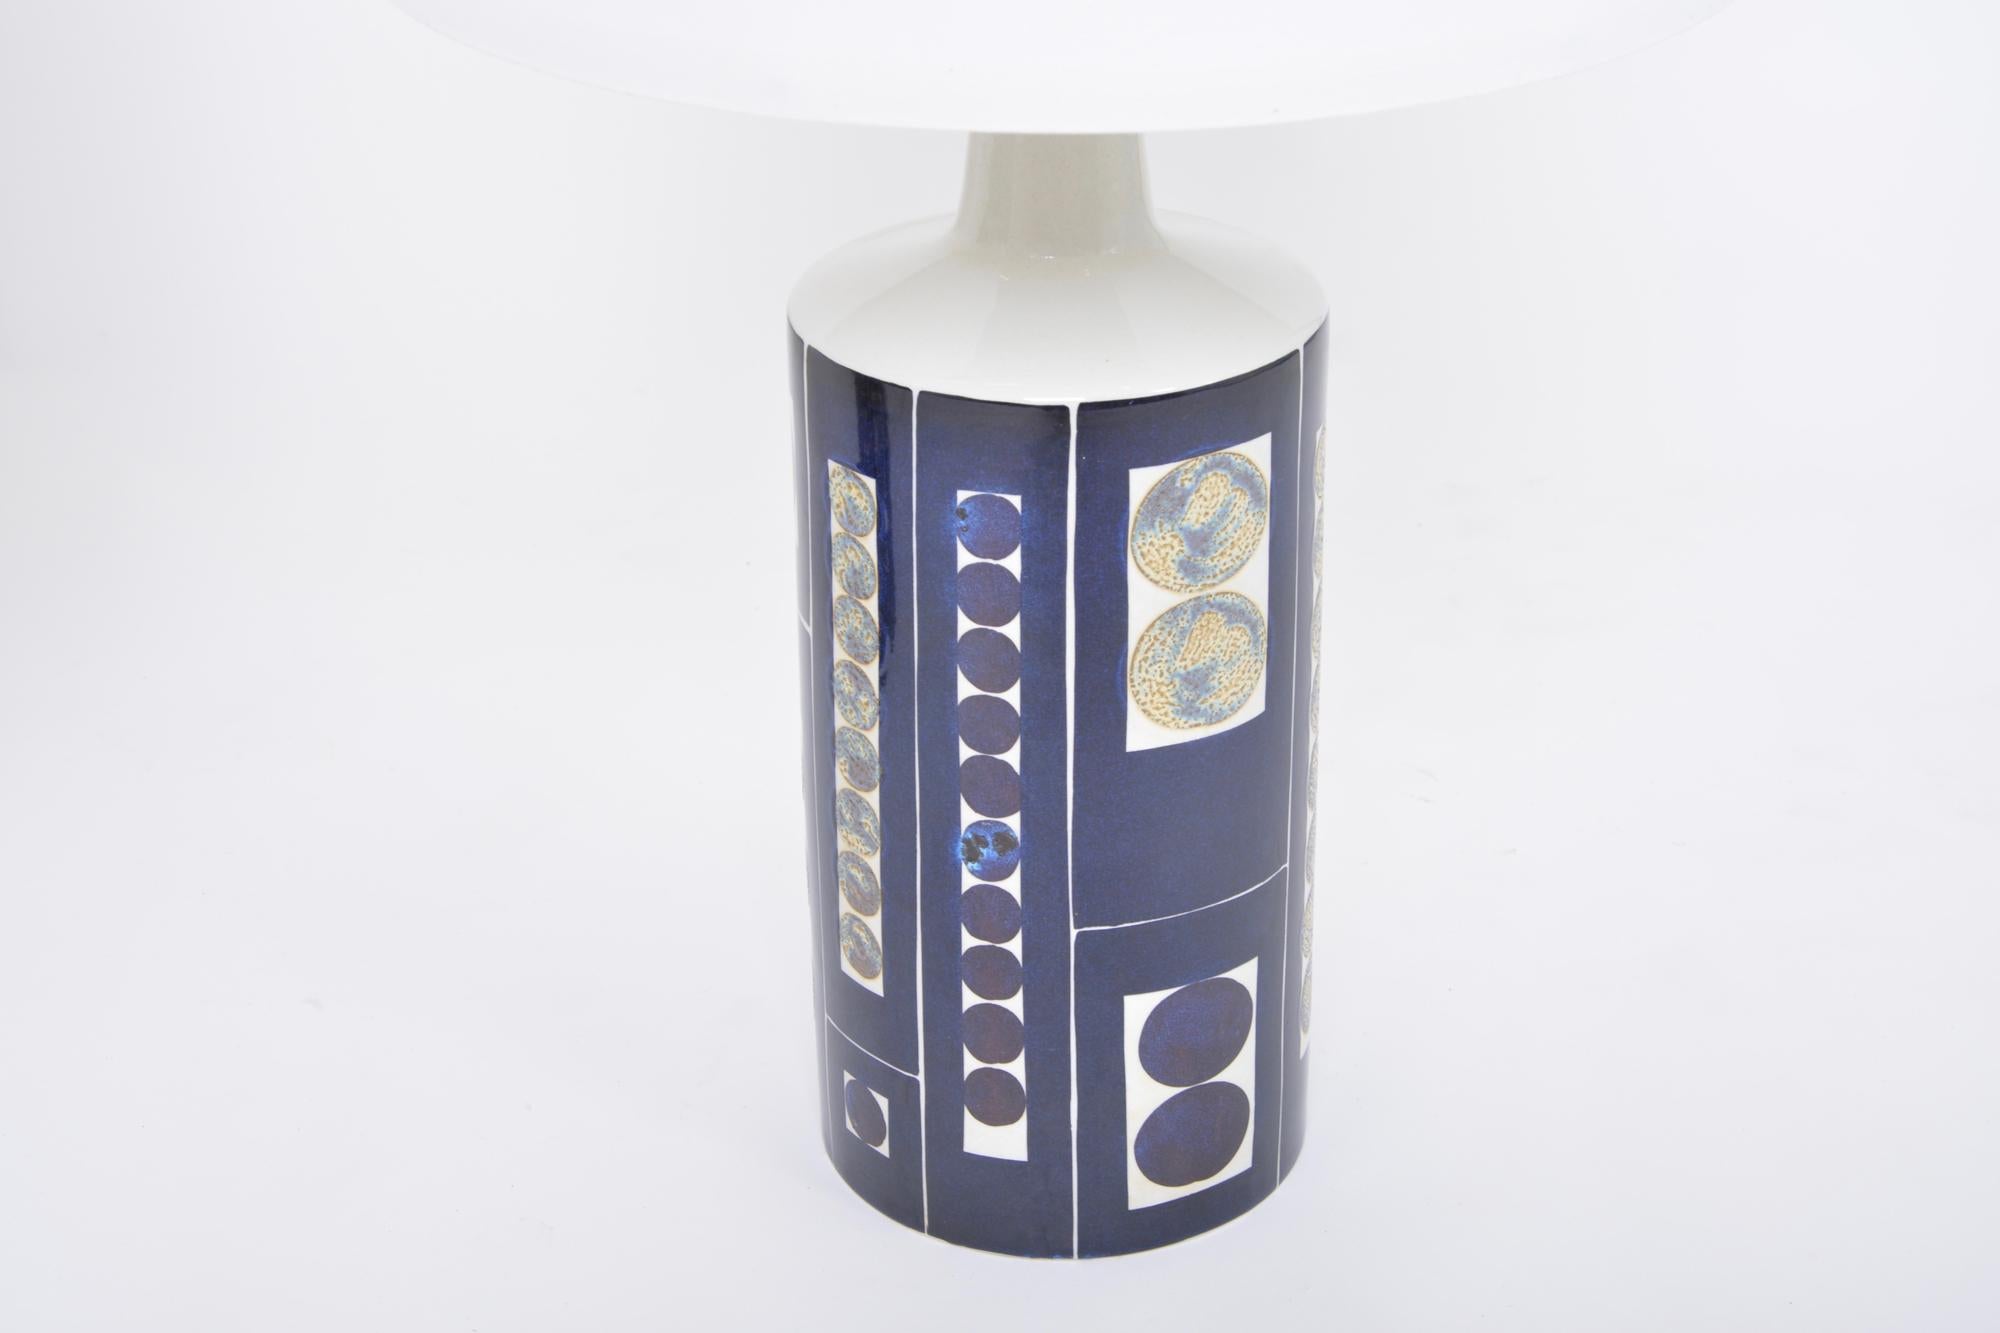 Pair of Royal 7 Midcentury Table Lamps by Ingelise Koefoed for Fog & Mørup In Excellent Condition For Sale In Berlin, DE